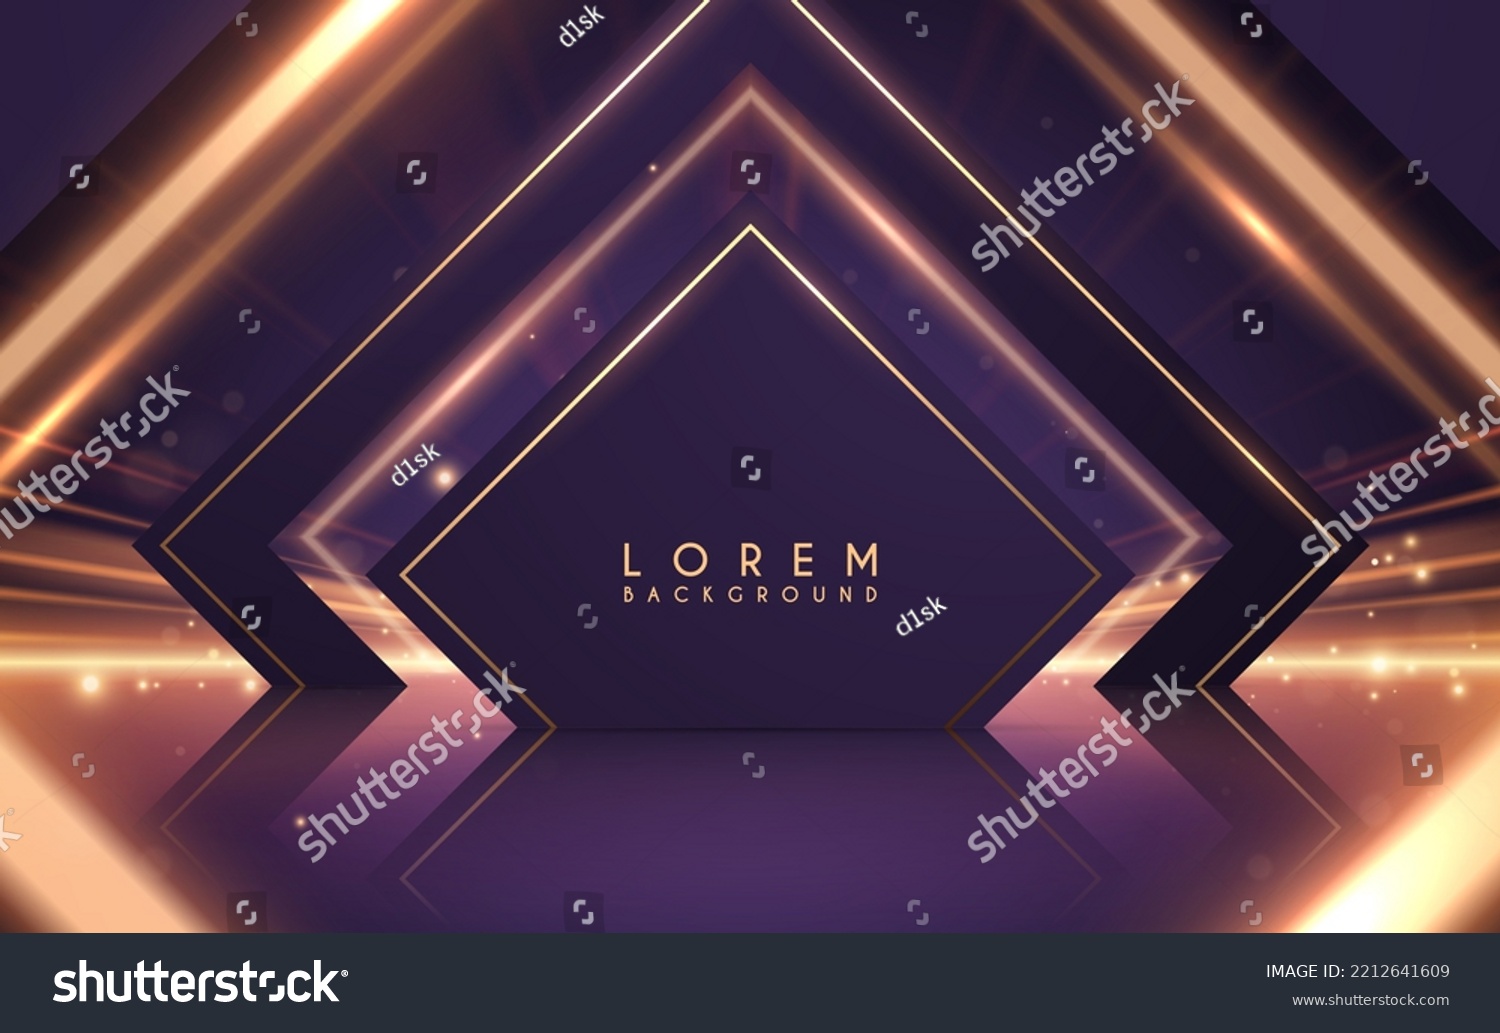 stock-vector-abstract-violet-shapes-with-golden-elements-and-light-effect-2212641609